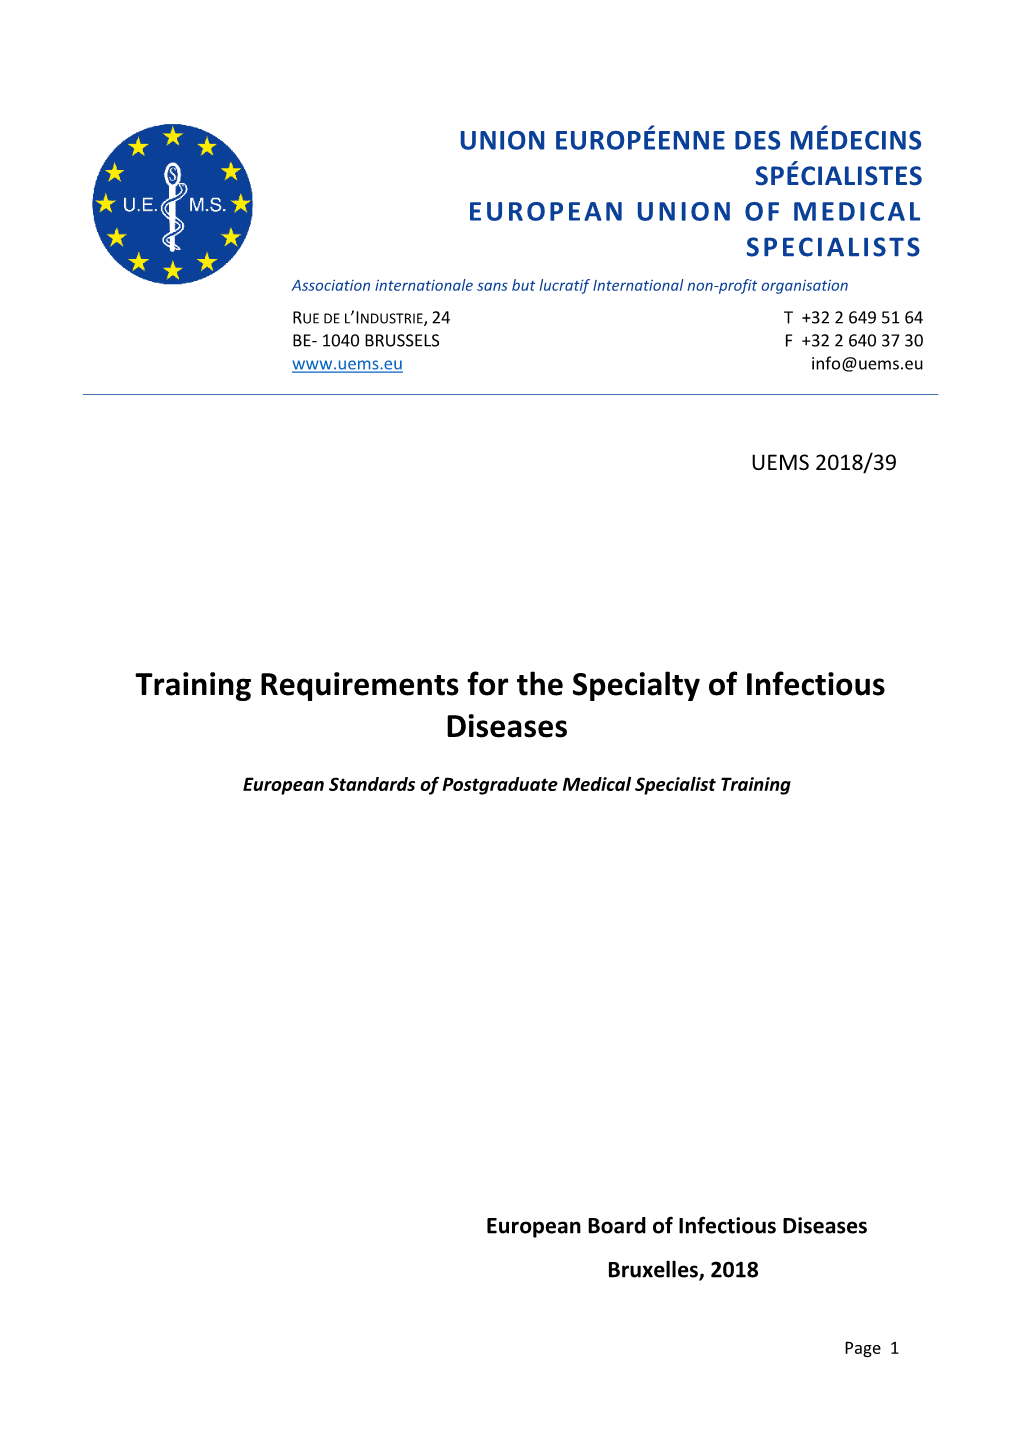 Training Requirements for the Specialty of Infectious Diseases